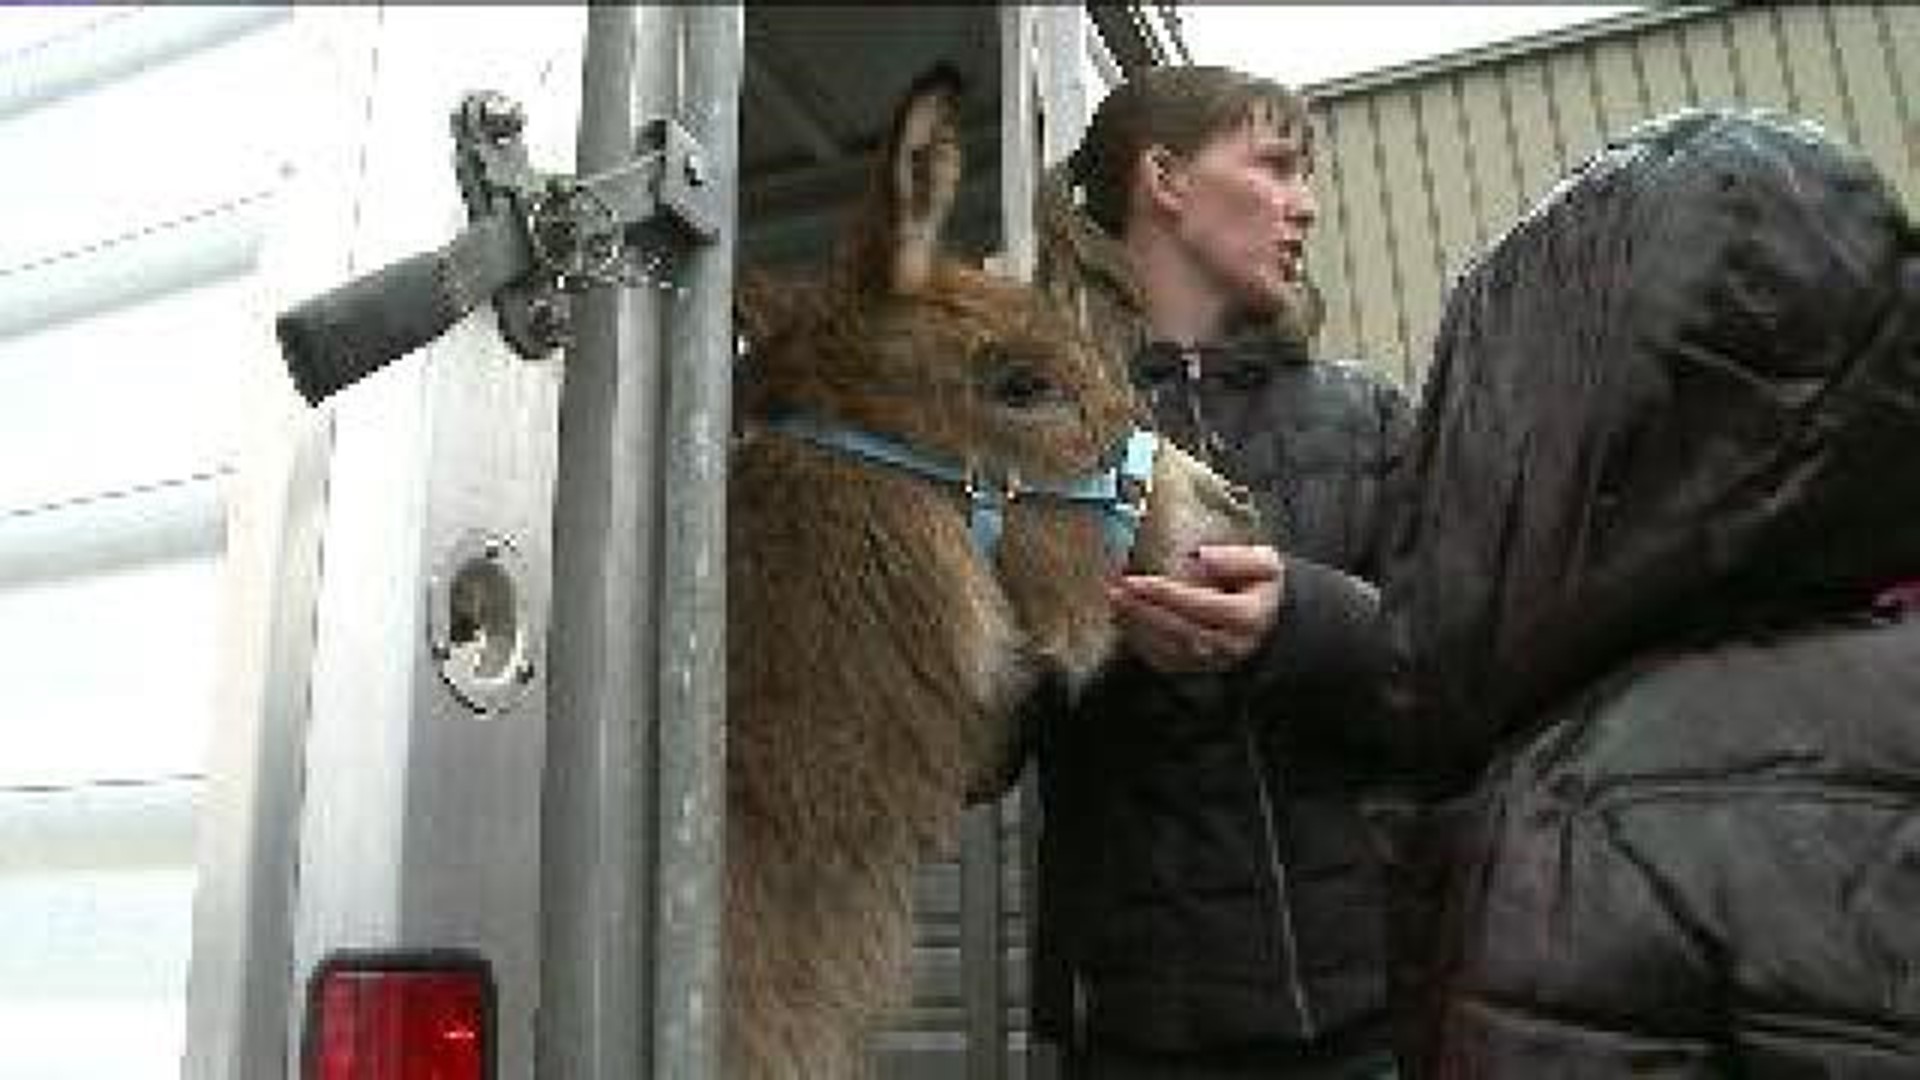 Company Helps Family After Pet Donkey Dies